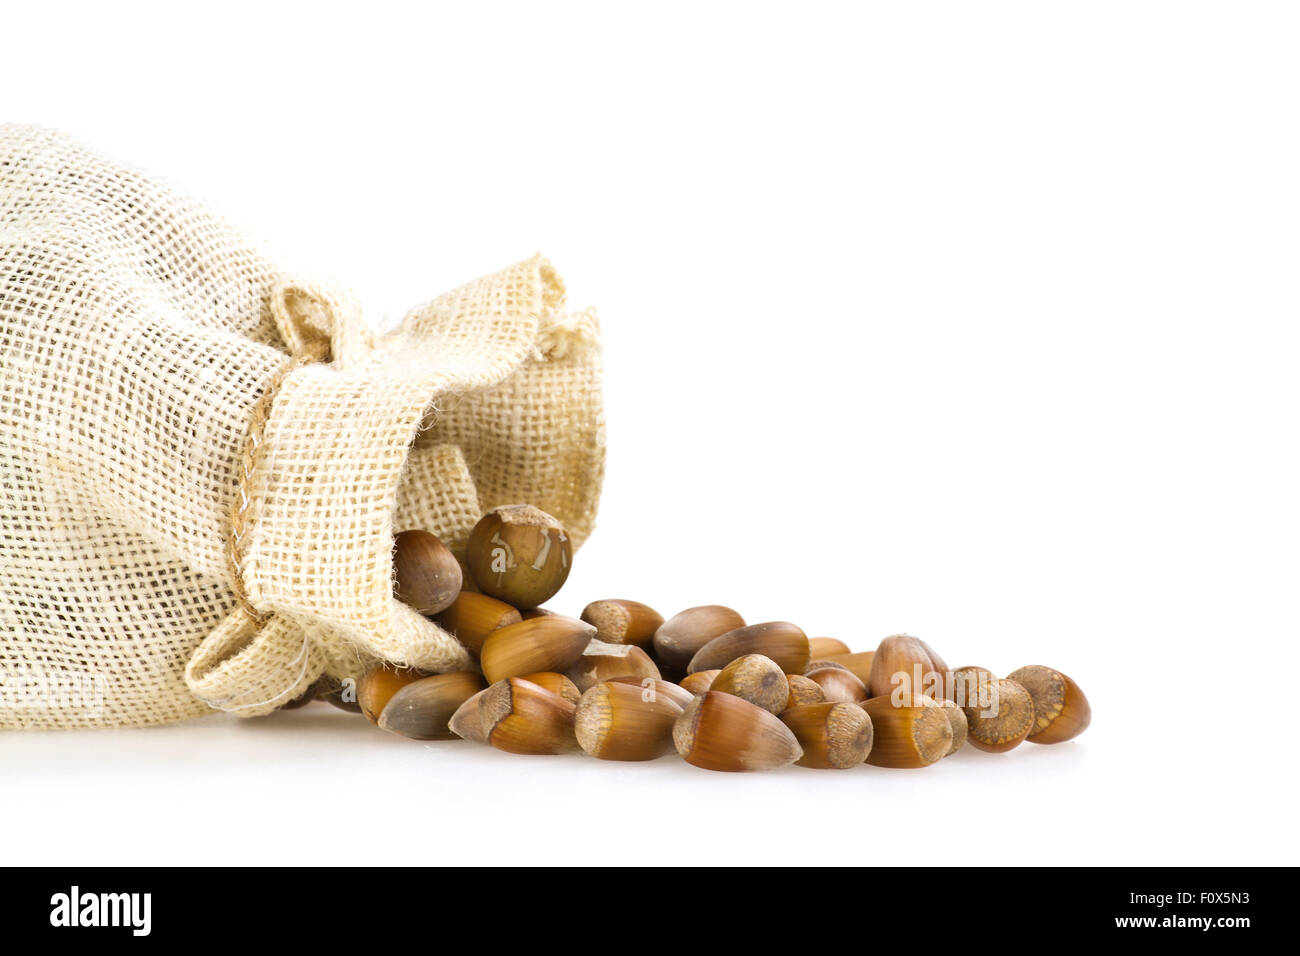 Hemp bag with scattered hazelnuts in shell Stock Photo